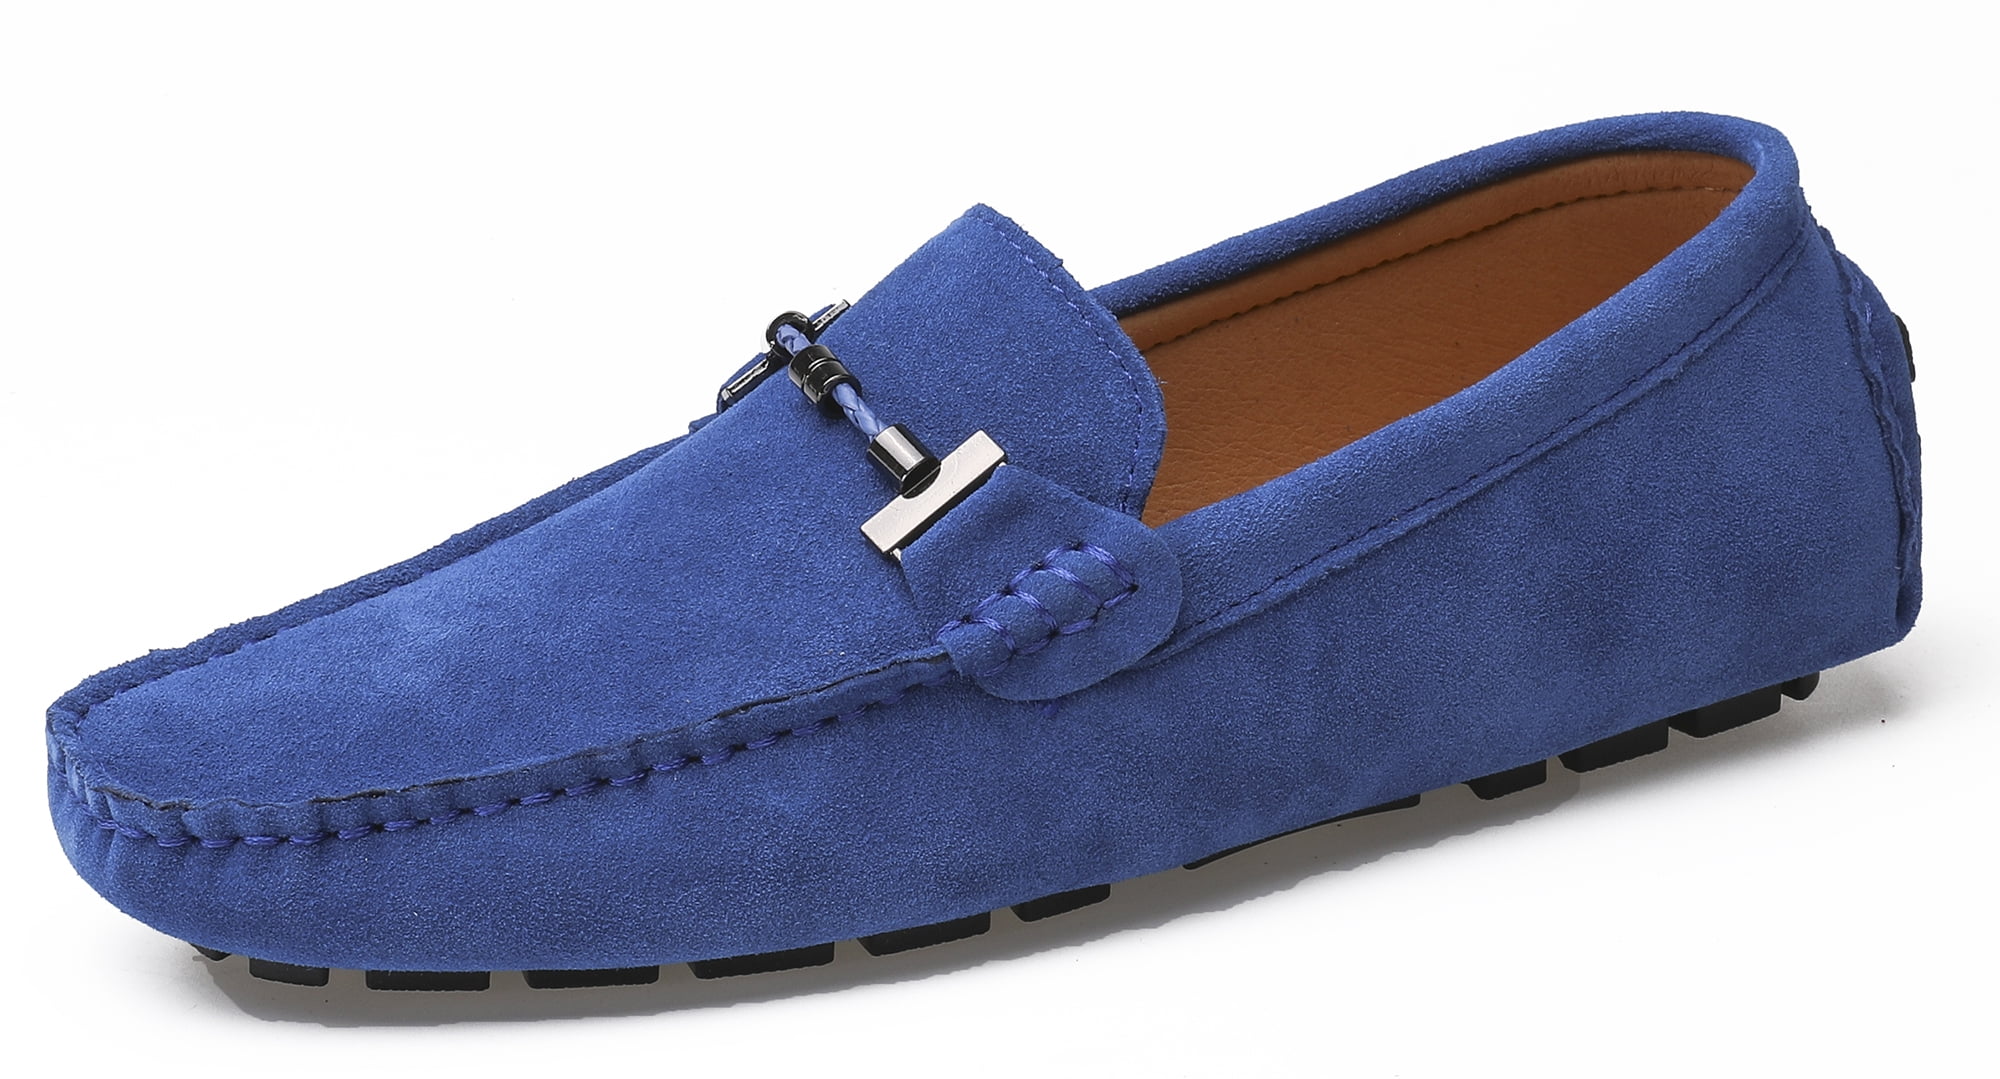 Handmade Men Navy blue suede Loafer shoes, Men suede casual driving shoes